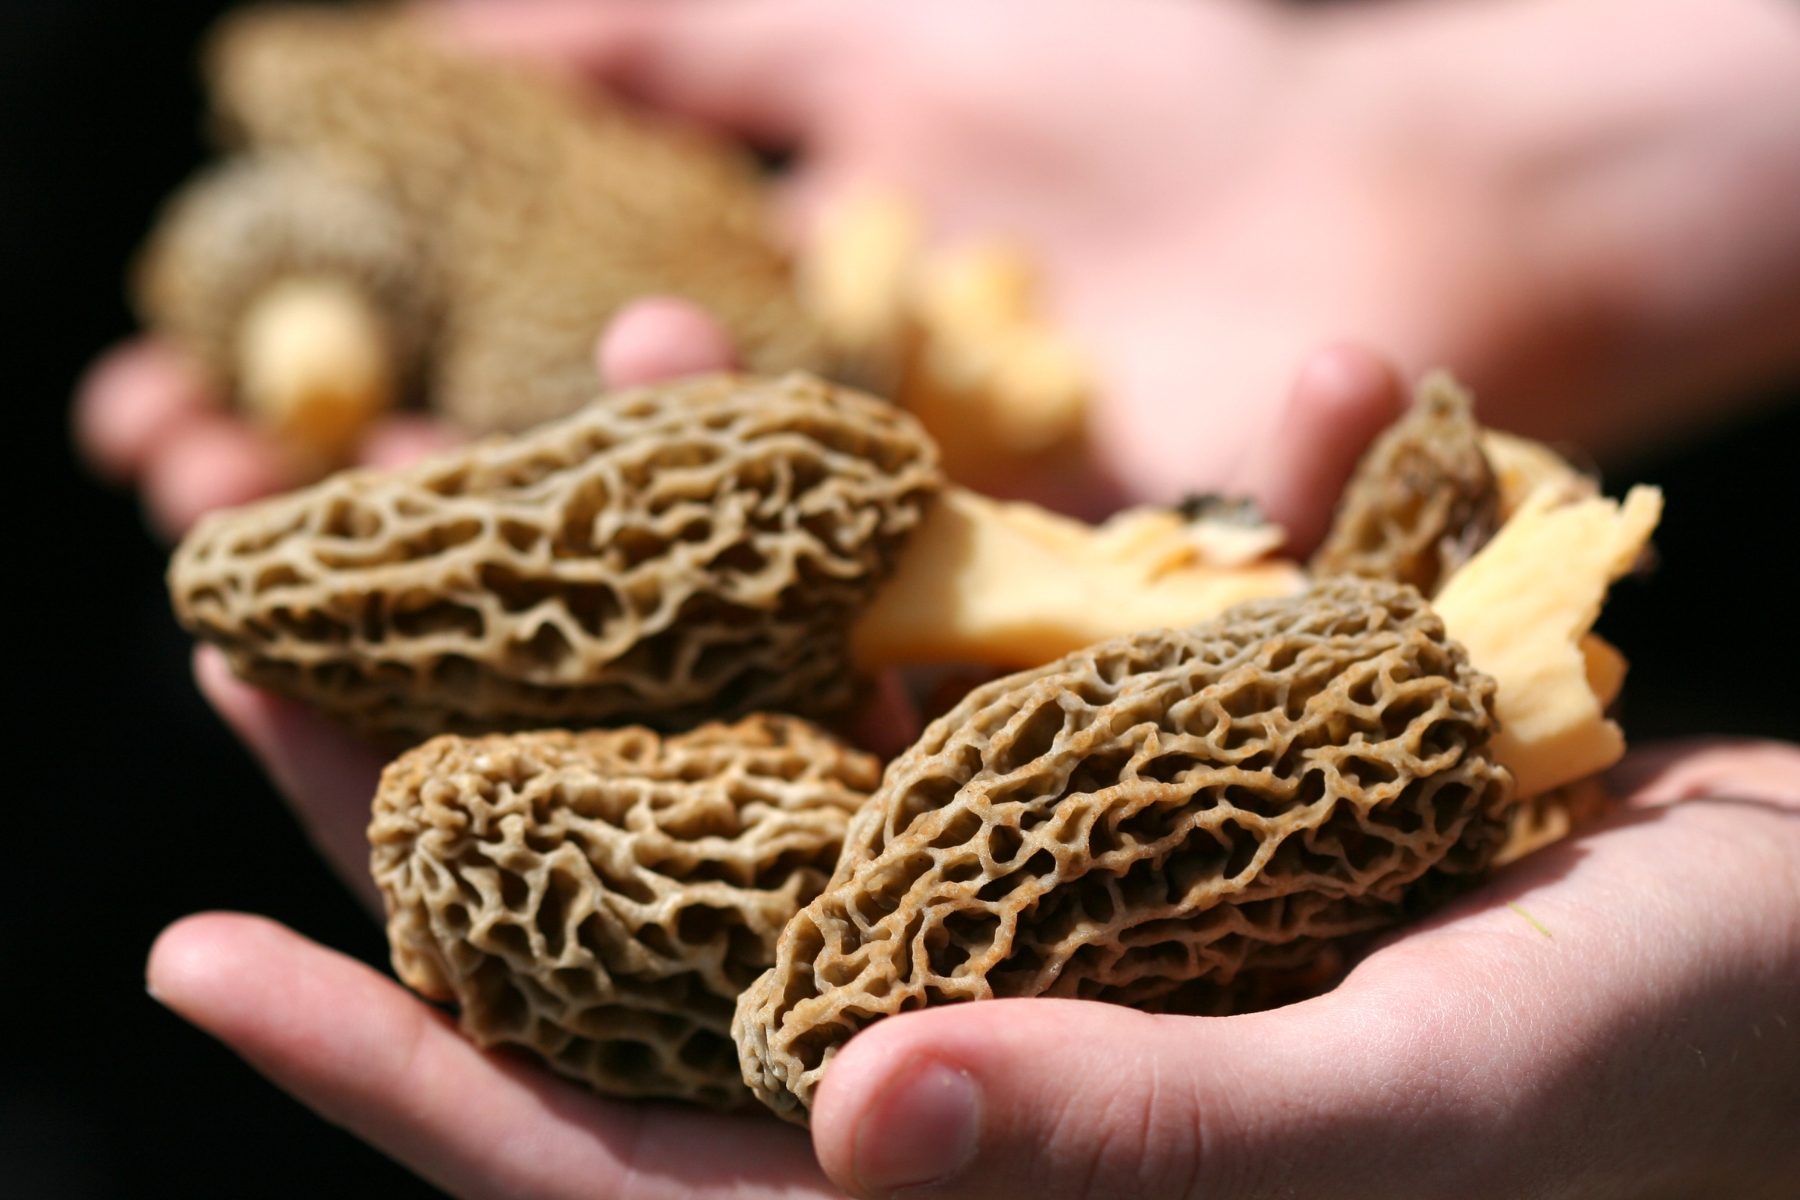 A hand holding 3 large, light brown morel mushrooms. The mushrooms have a honeycomb like top.